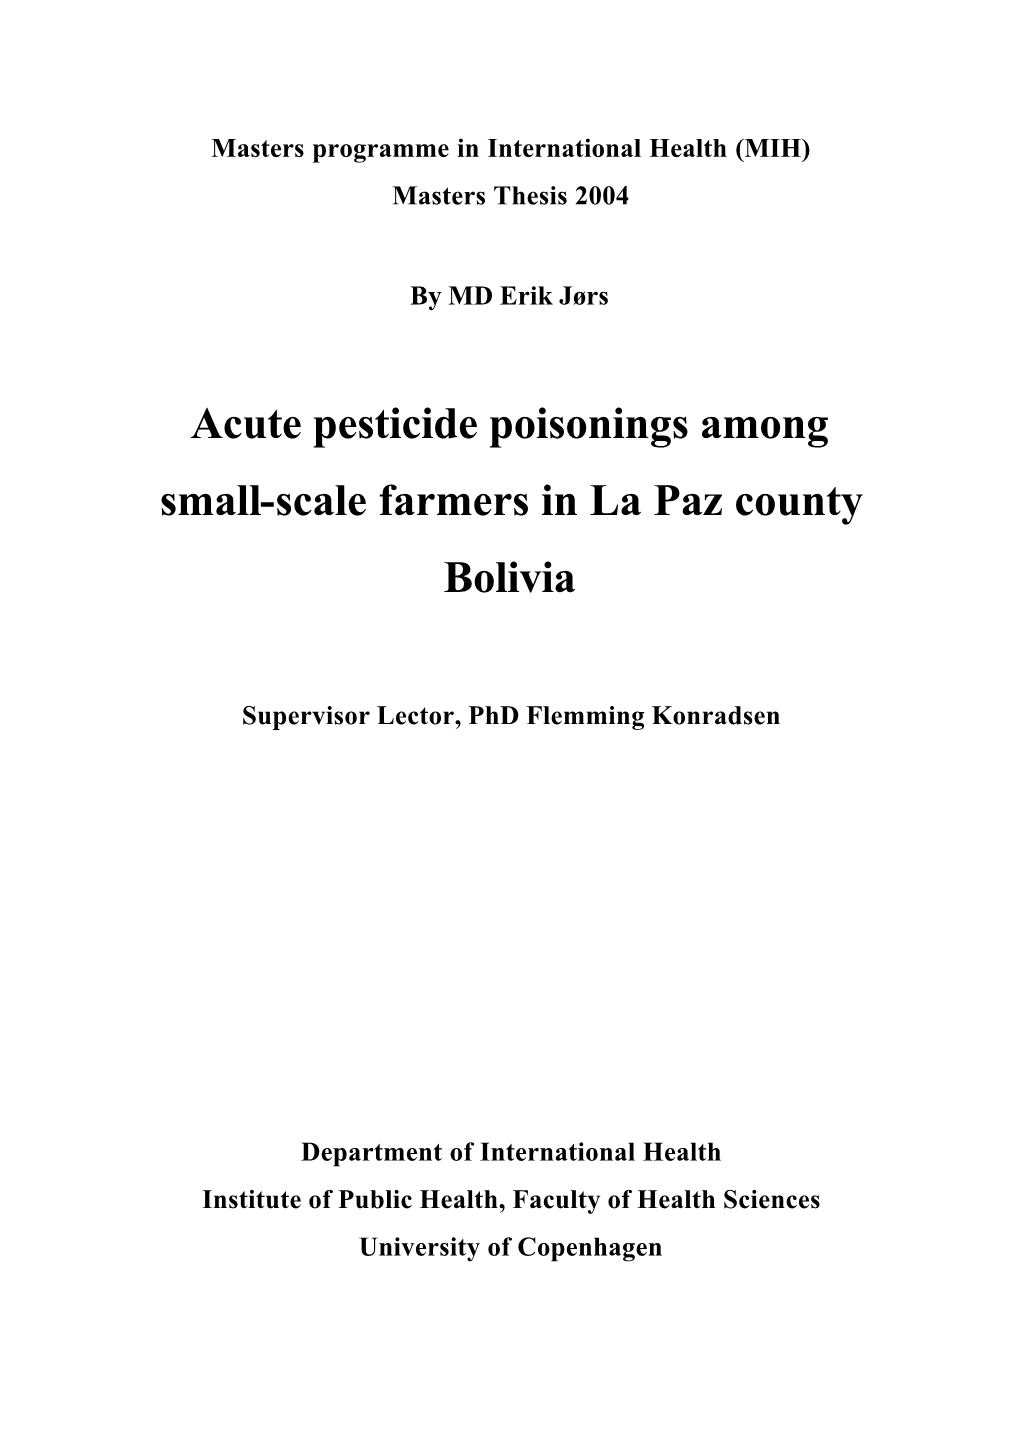 Acute Pesticide Poisonings Among Small-Scale Farmers in La Paz County